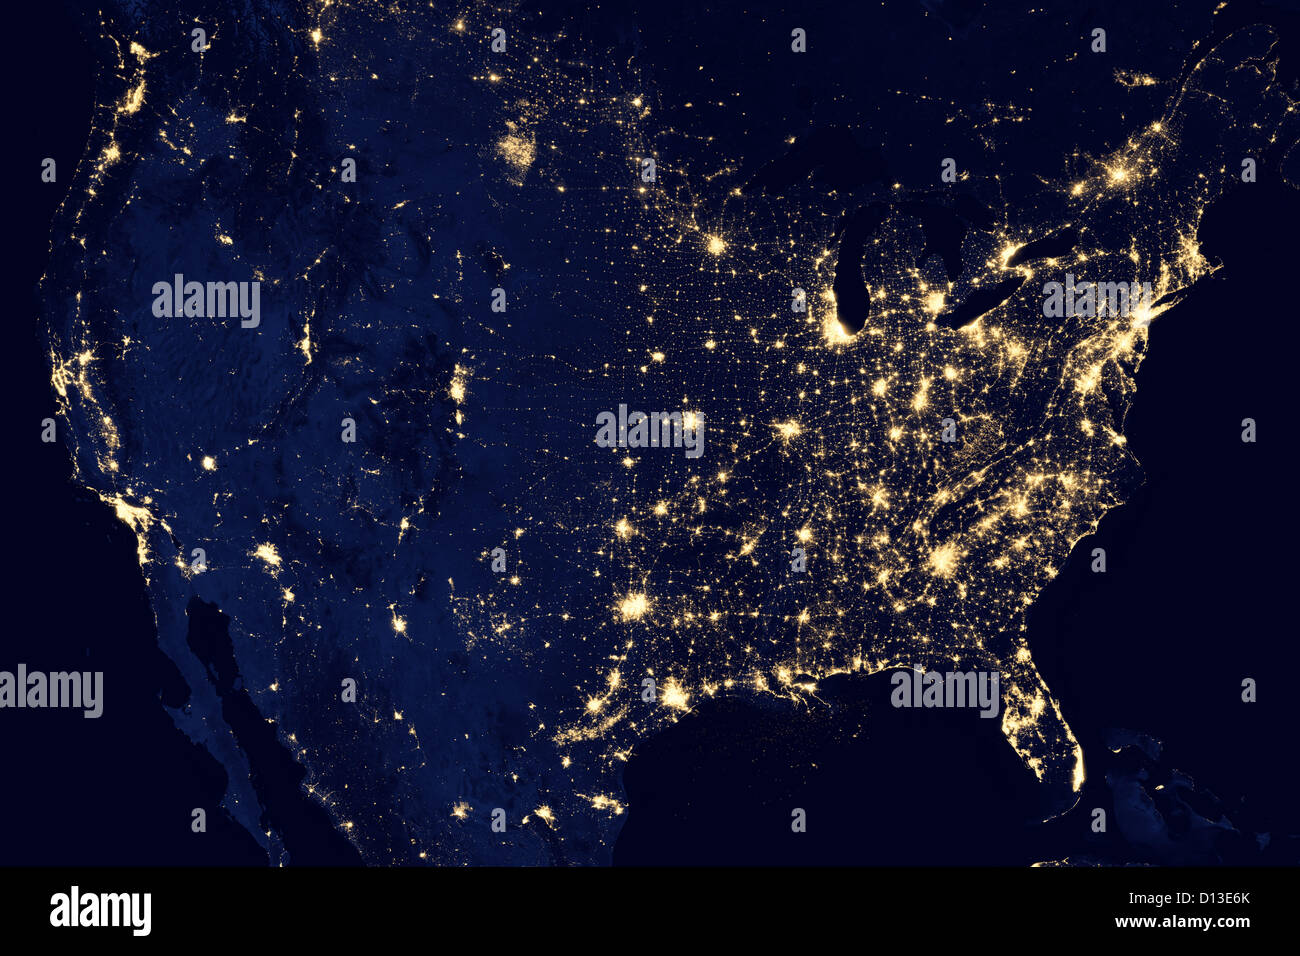 Composite image of the United States of America at night as seen from the Suomi NPP satellite orbiting earth from April and October 2012. The new data was mapped over existing Blue Marble imagery of Earth to provide a realistic view of the planet. The nighttime view was made possible by the new satelliteÕs day-night band of the Visible Infrared Imaging Radiometer Suite. VIIRS detects light in a range of wavelengths from green to near-infrared and uses filtering techniques to observe dim signals such as city lights, gas flares, auroras, wildfires, and reflected moonlight. In this case, auroras, Stock Photo